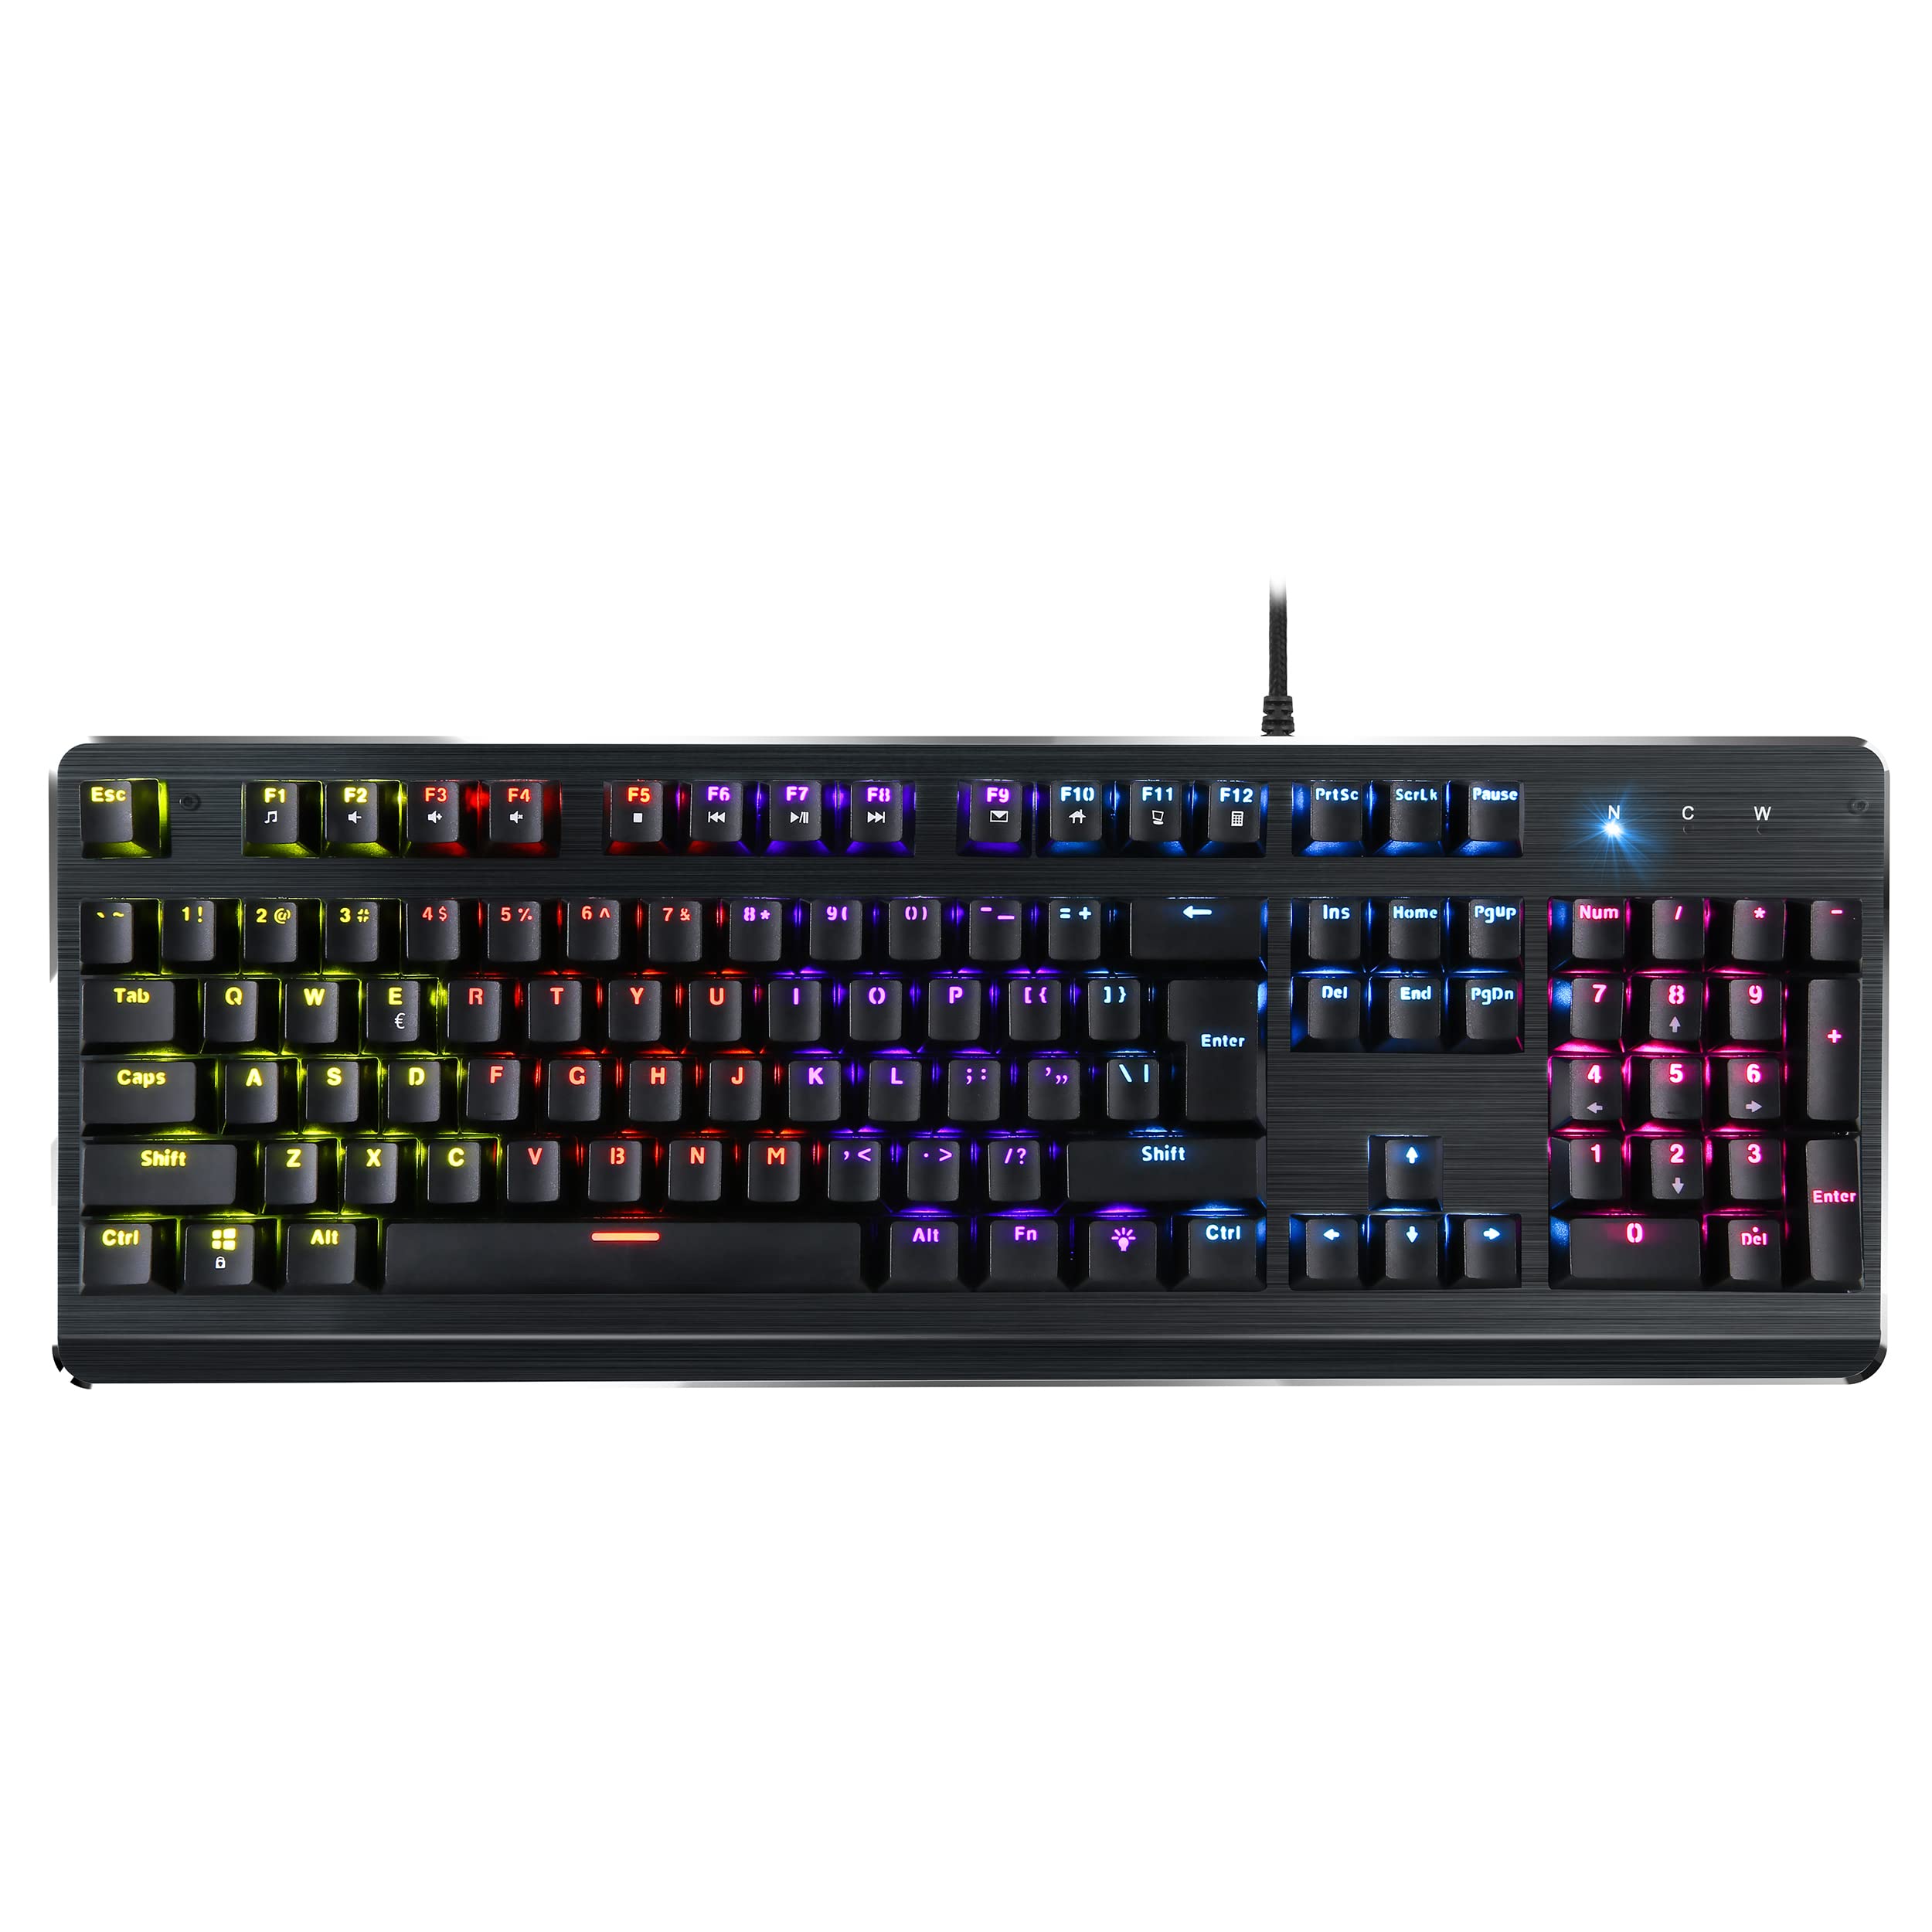 INLAND ProHT Rainbow LED Backlit USB Wired Keyboard with Blue Switches,Durable ABS Keycaps/Anti-Ghosting/Spill-Resistant Mechanical Keyboard for PC Mac Xbox Gamer